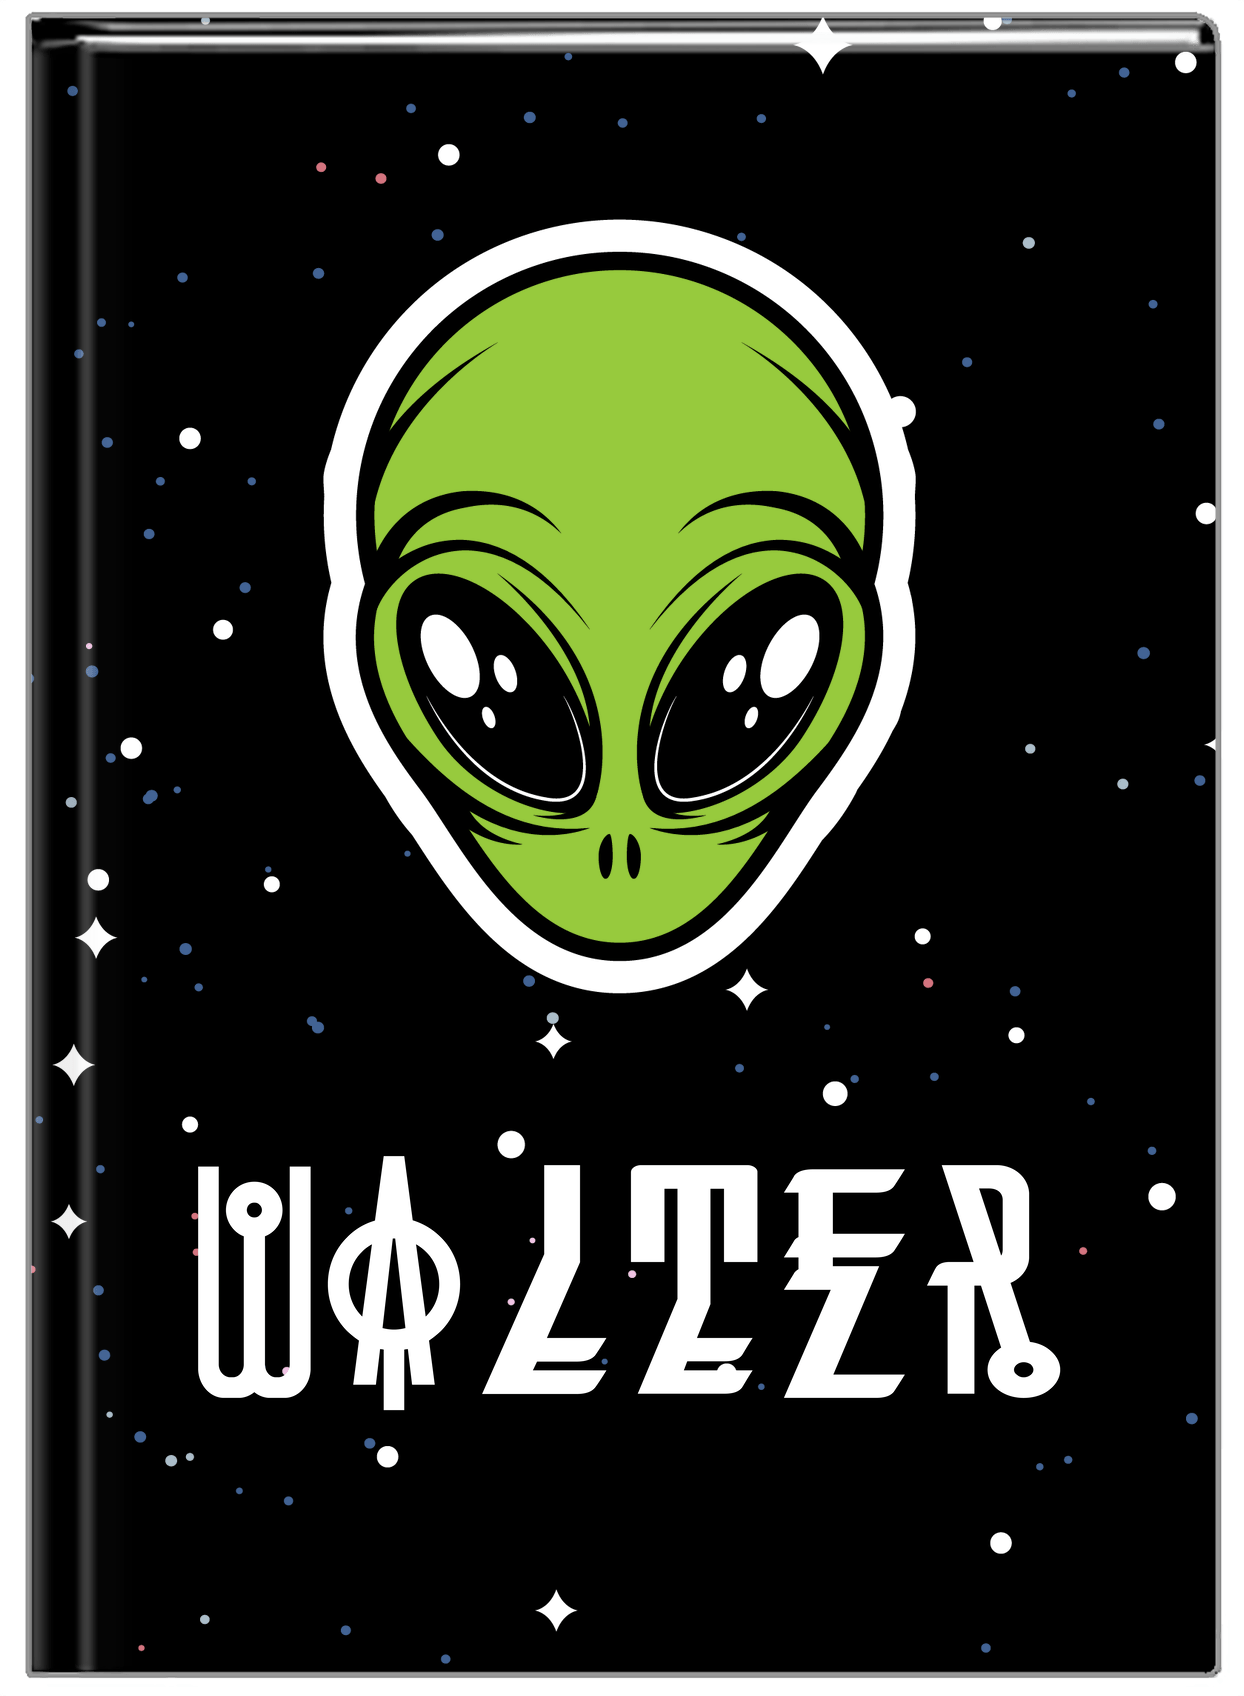 Personalized Aliens / UFO Journal - Black Background - Front View